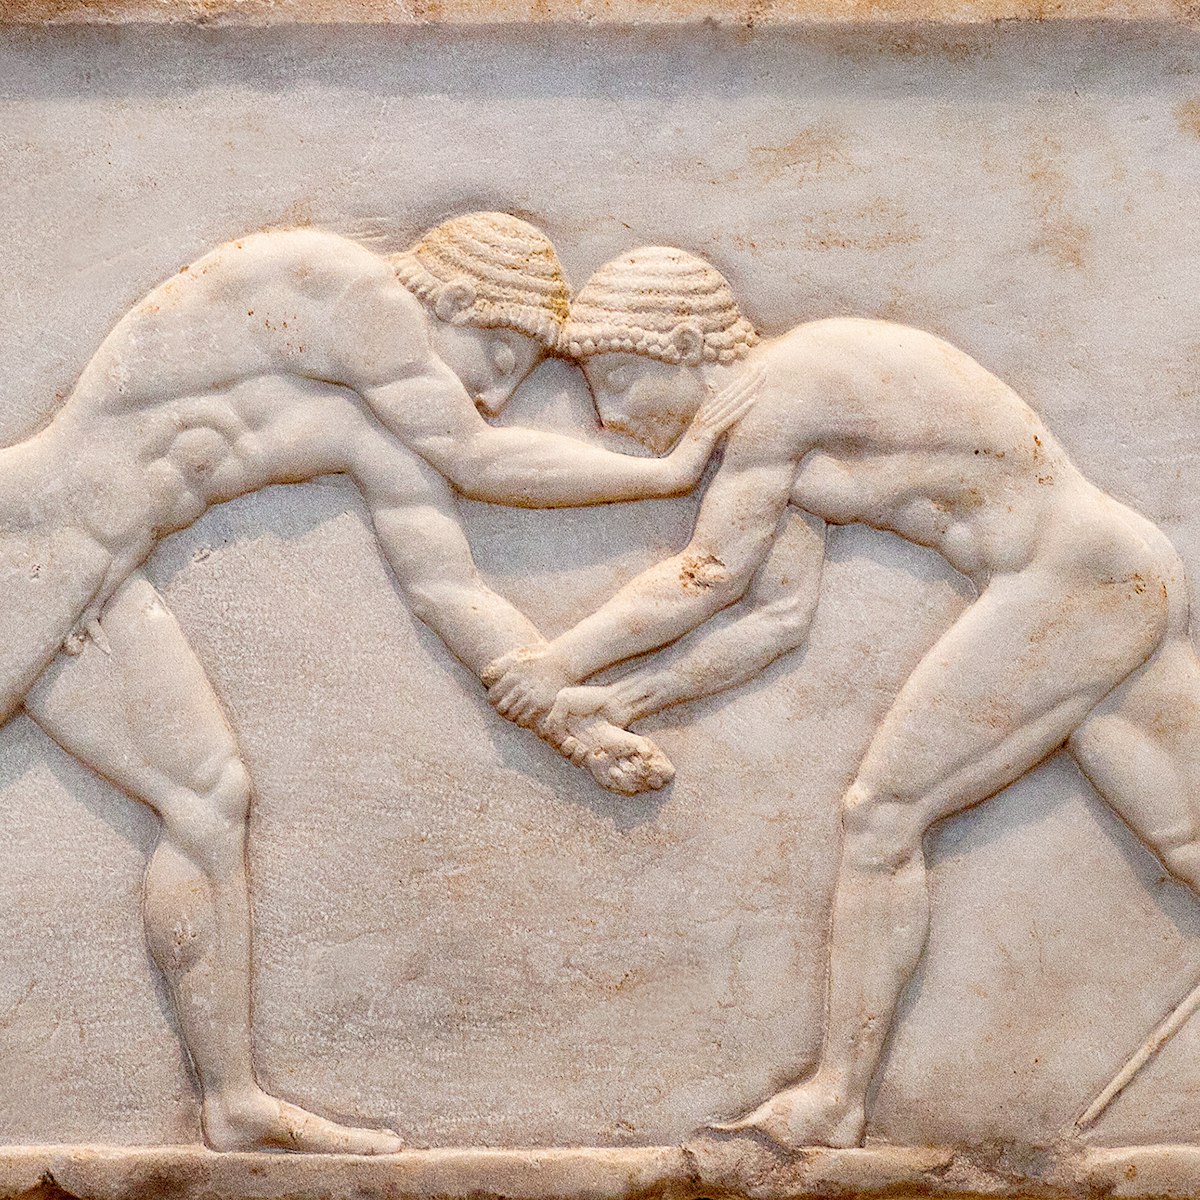 Ancient bas-relief on grave stele in Kerameikos with scene from Palaestra - wrestlers in action. On the left an athlete is ready to jump, on the right another one prepairing the pit. Athens, Greece; Shutterstock ID 1745203673; your: Erin Lenczycki; gl: 65050 ; netsuite: Digital; full: Digital
1745203673